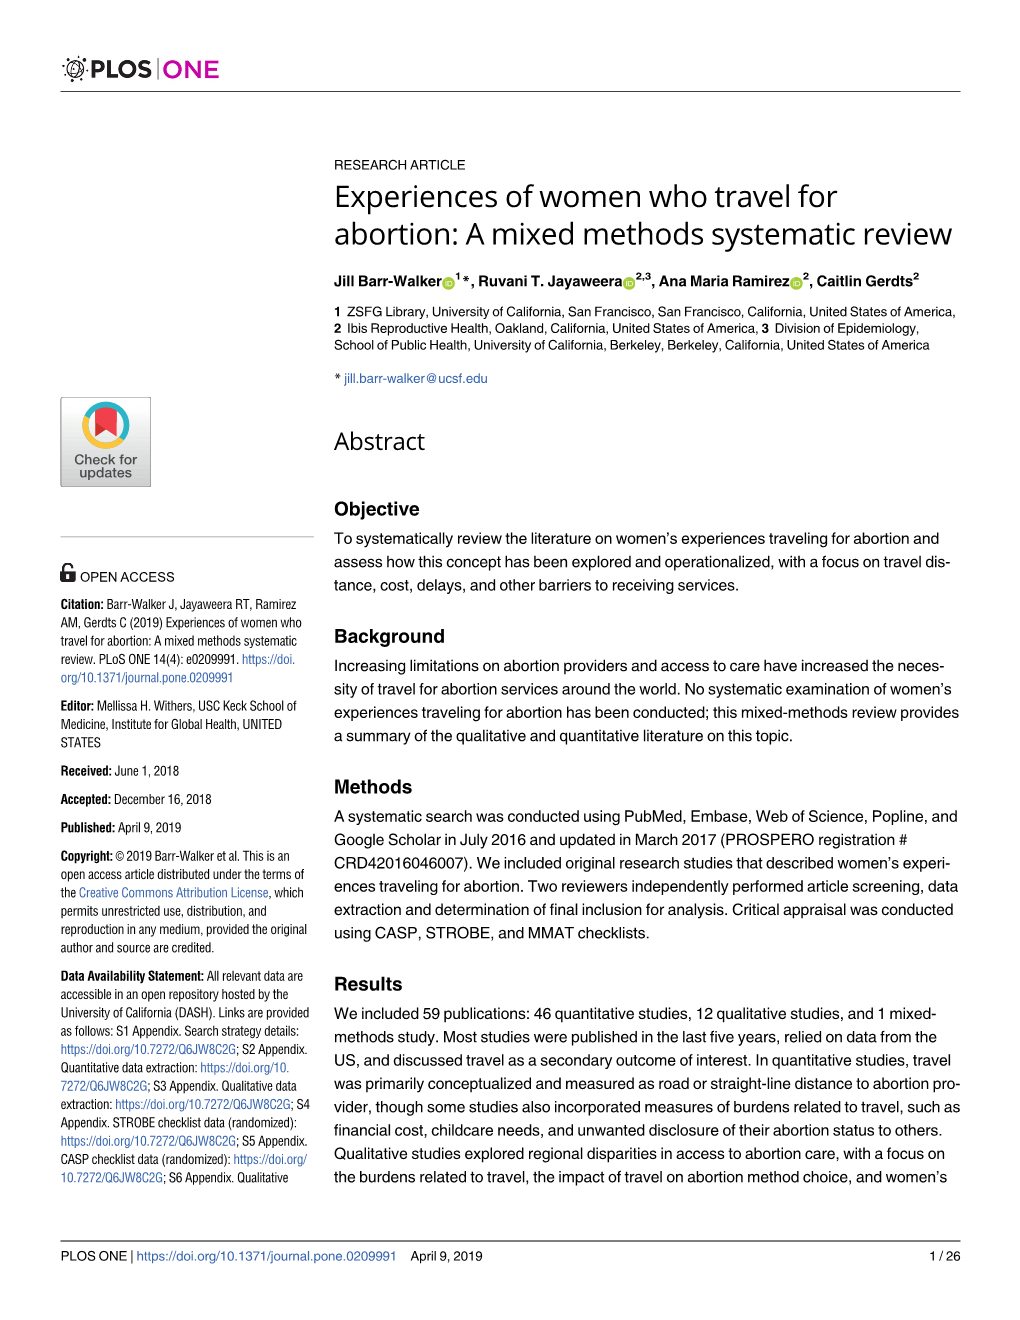 Experiences of Women Who Travel for Abortion: a Mixed Methods Systematic Review